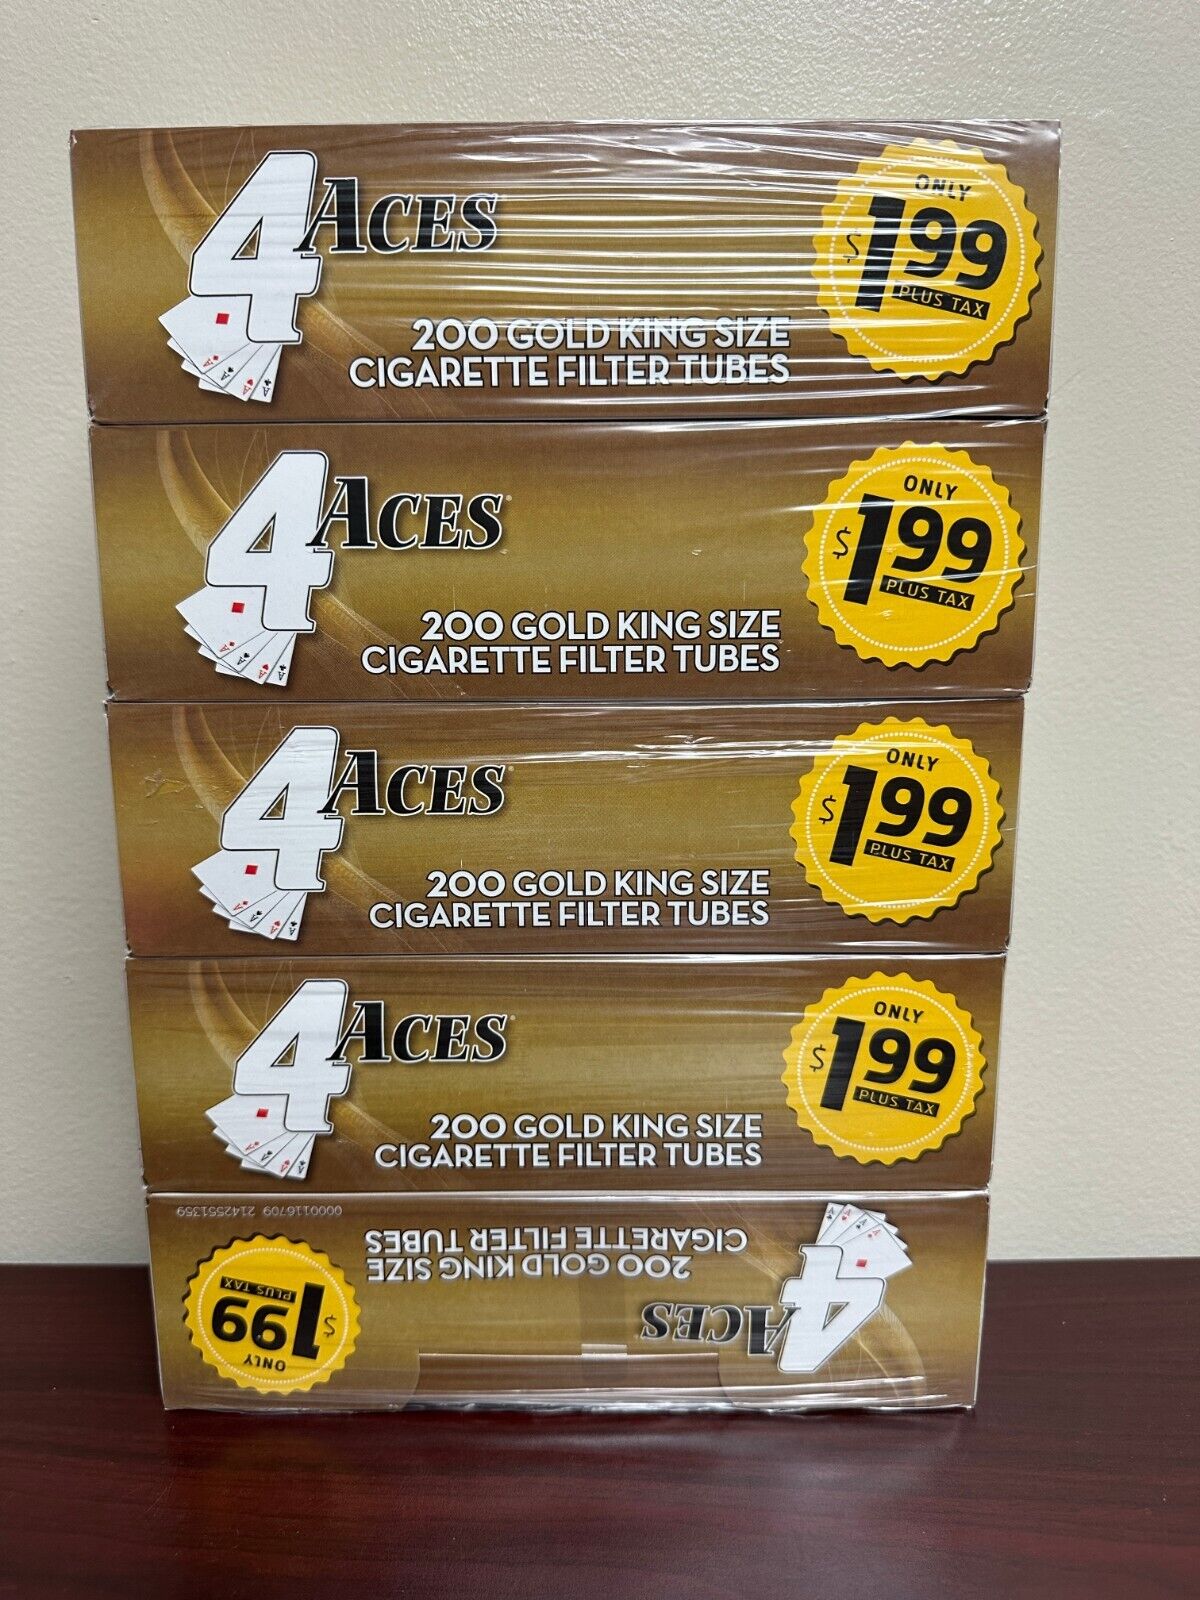 4 ACES Gold Light King Size 200ct Each -5 Pack Cigarette Tubes